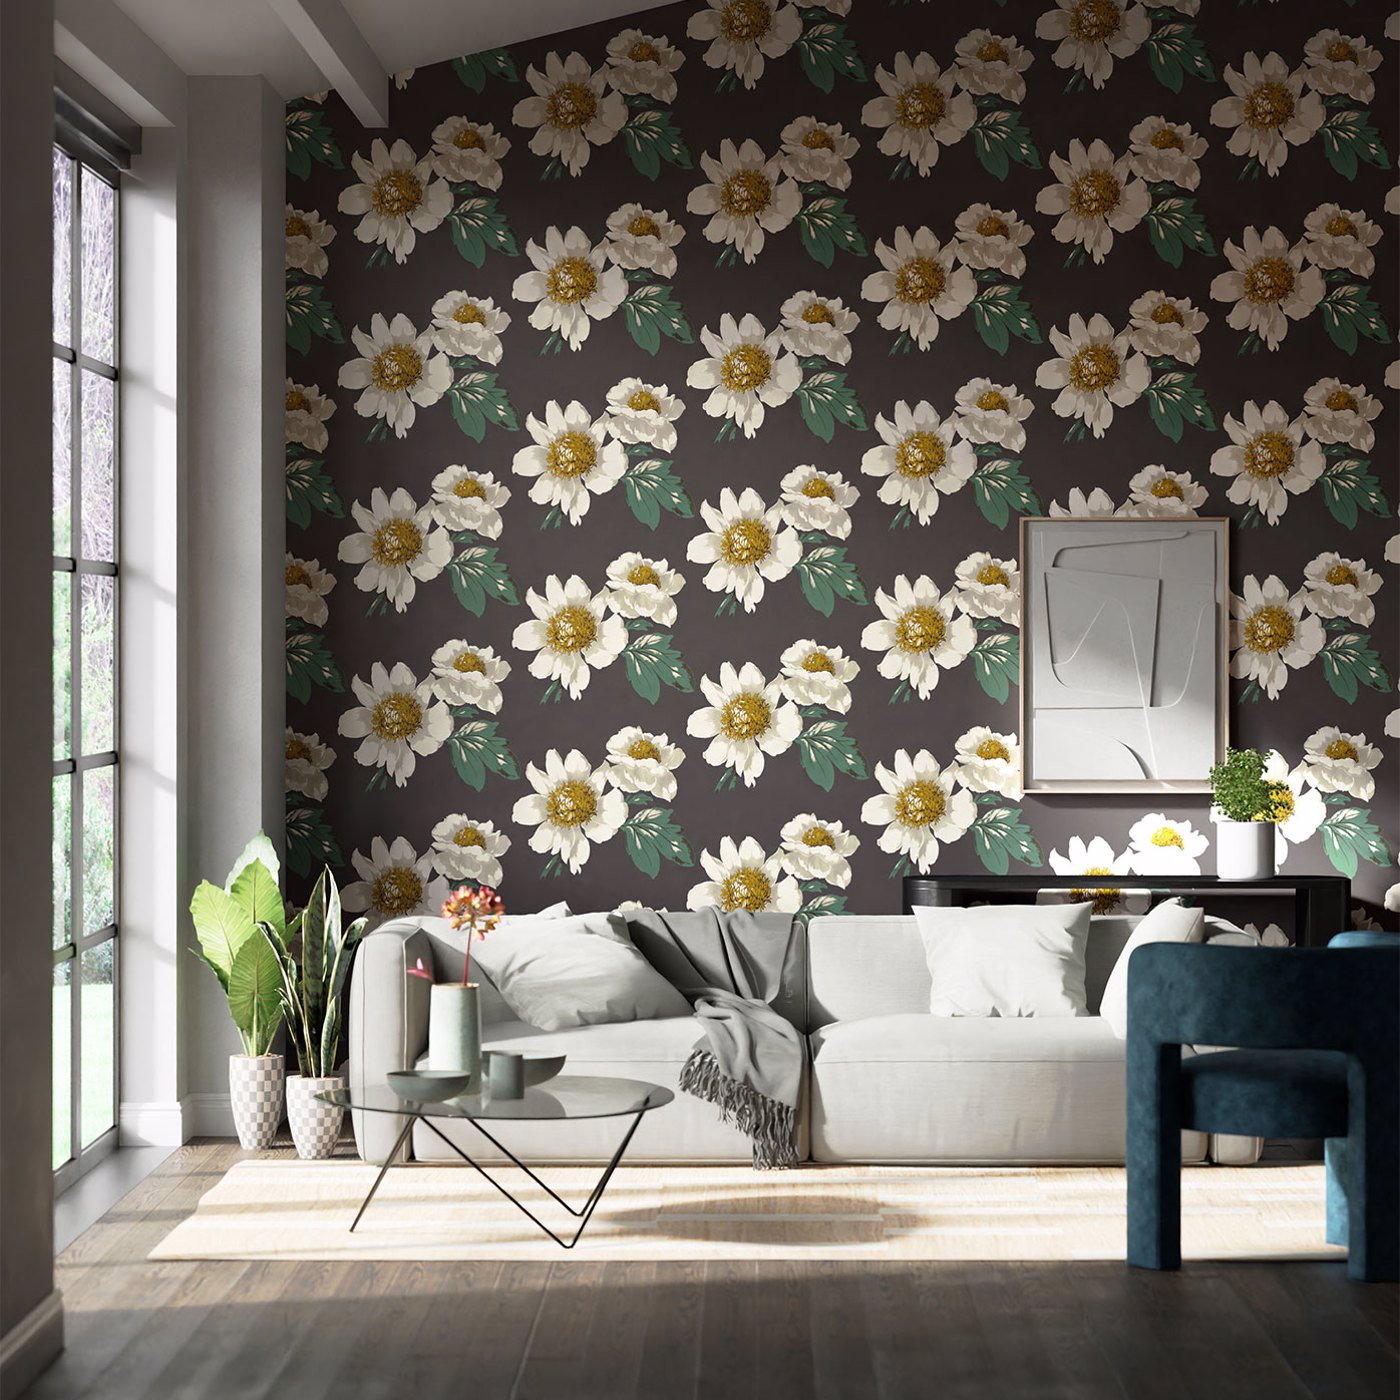 Paeonia Black Earth/Fig Leaf/ Gold Wallpaper by HAR